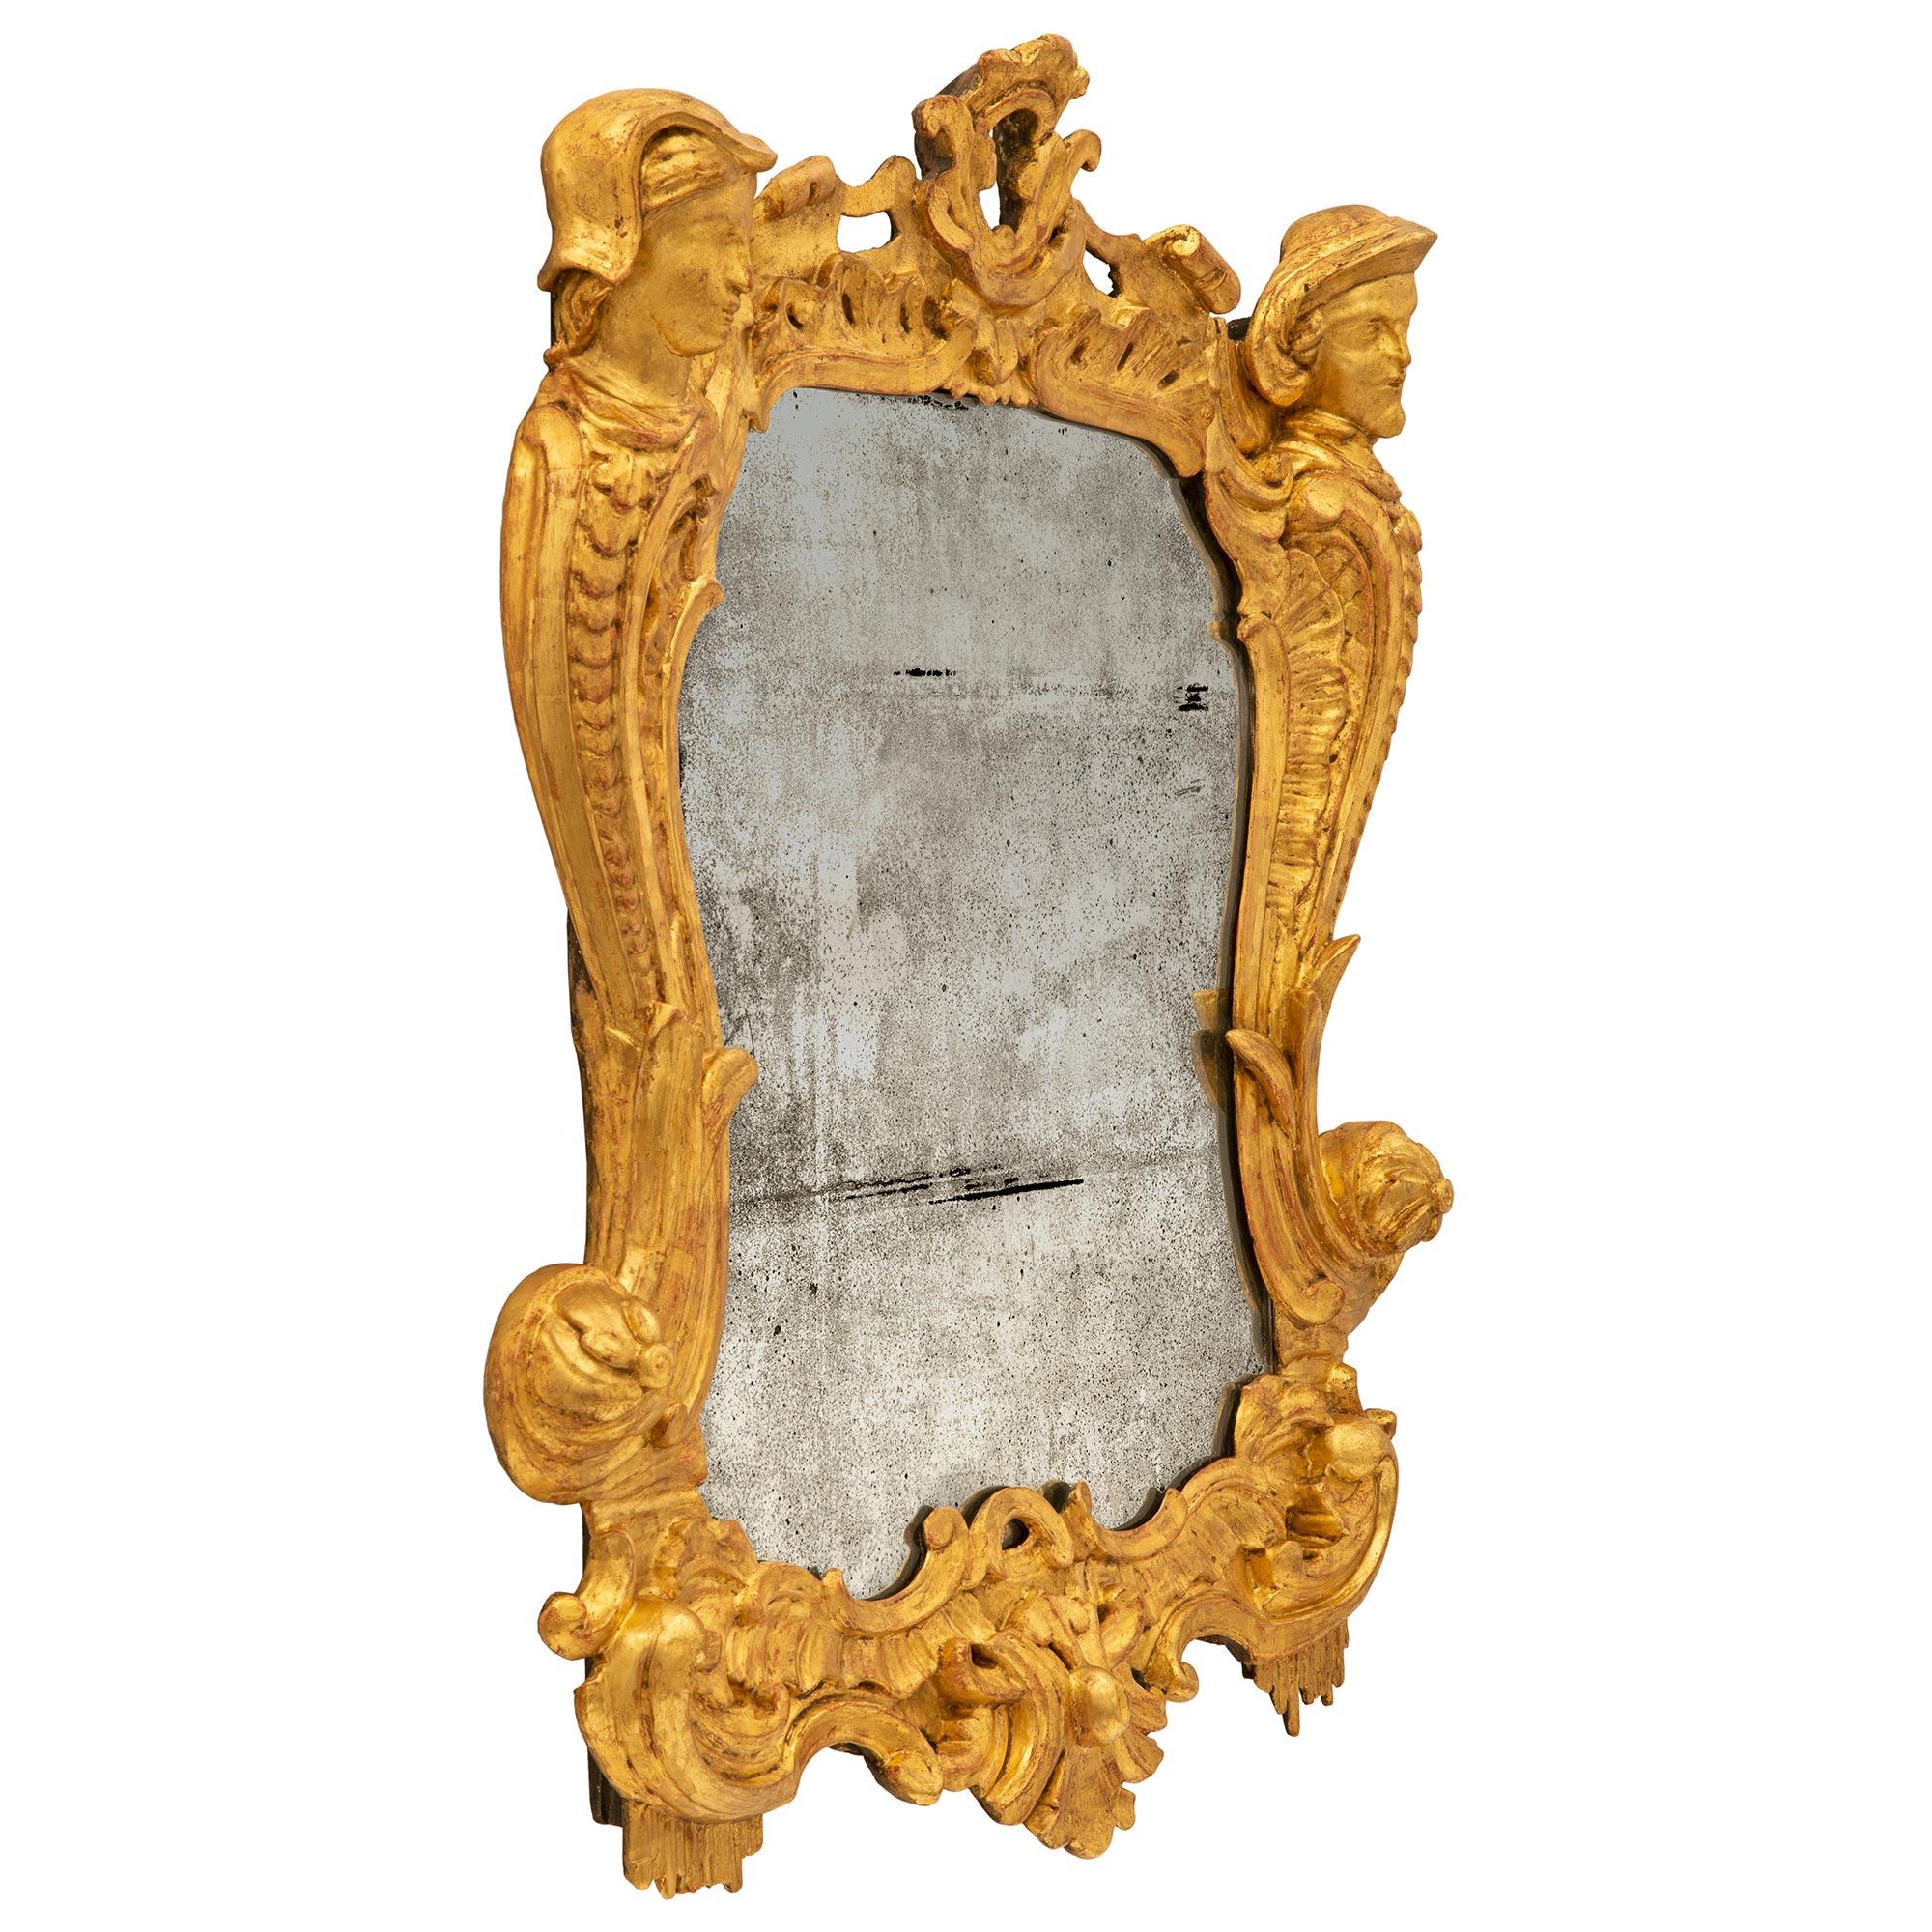 An outstanding Italian early 19th century Baroque st. giltwood mirror. The mirror retains its original mirror plate set within a stunning and extremely decorative giltwood frame. The frame displays beautiful richly carved scrolled foliate designs